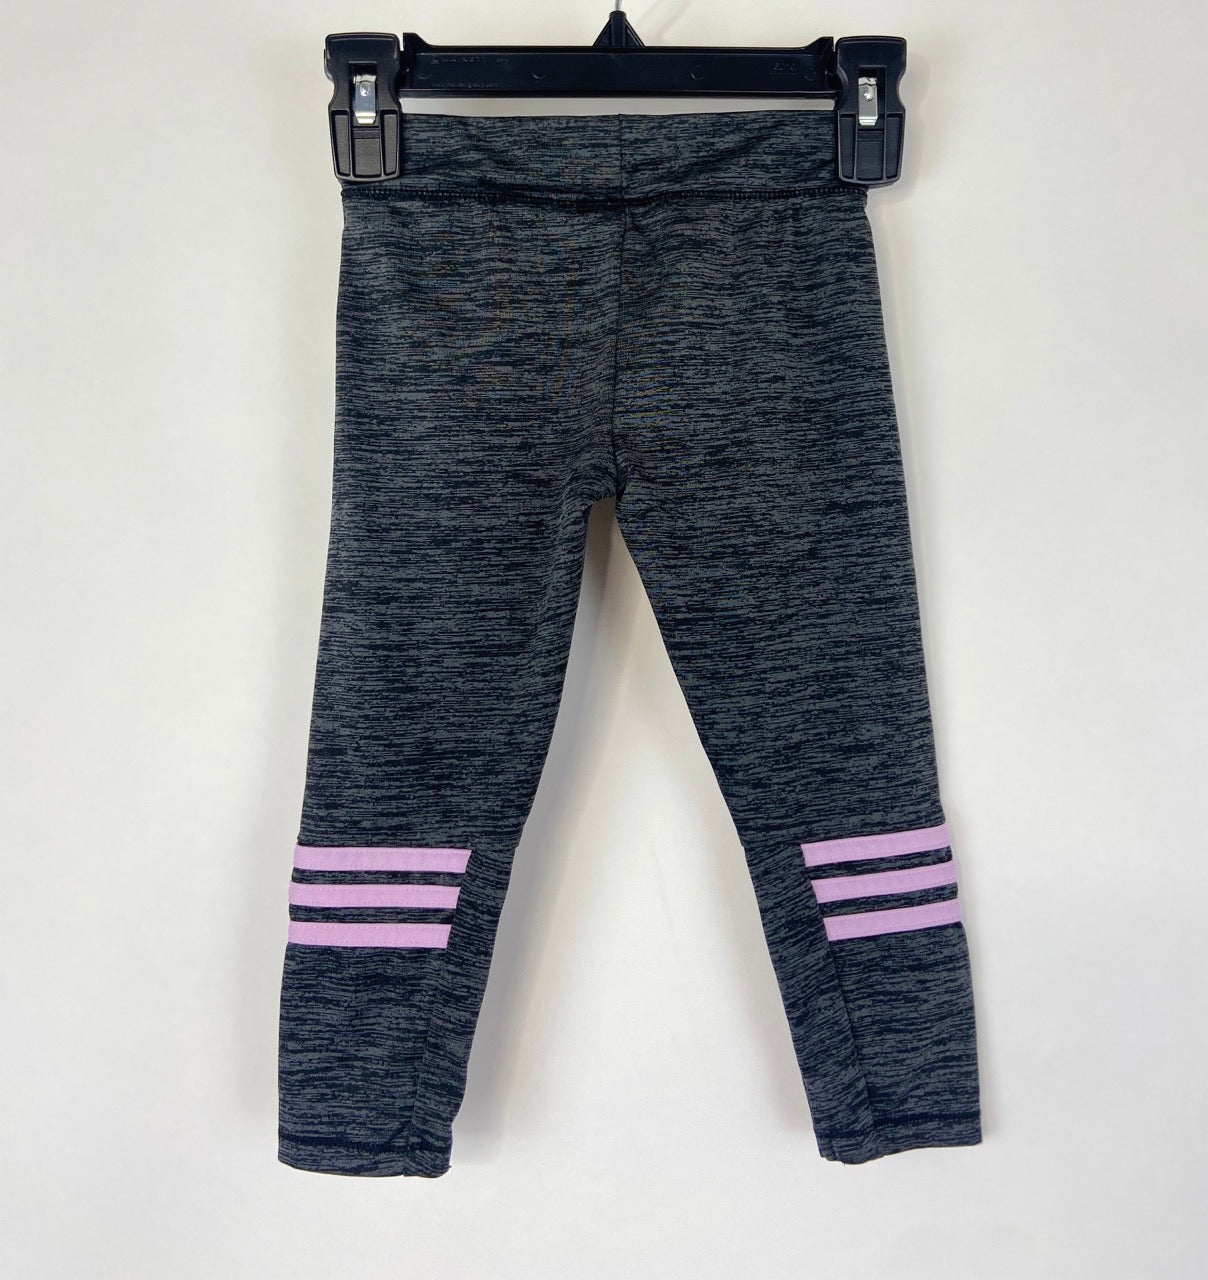 Heather Gray and Light Pink Adidas Leggings - 24 Months